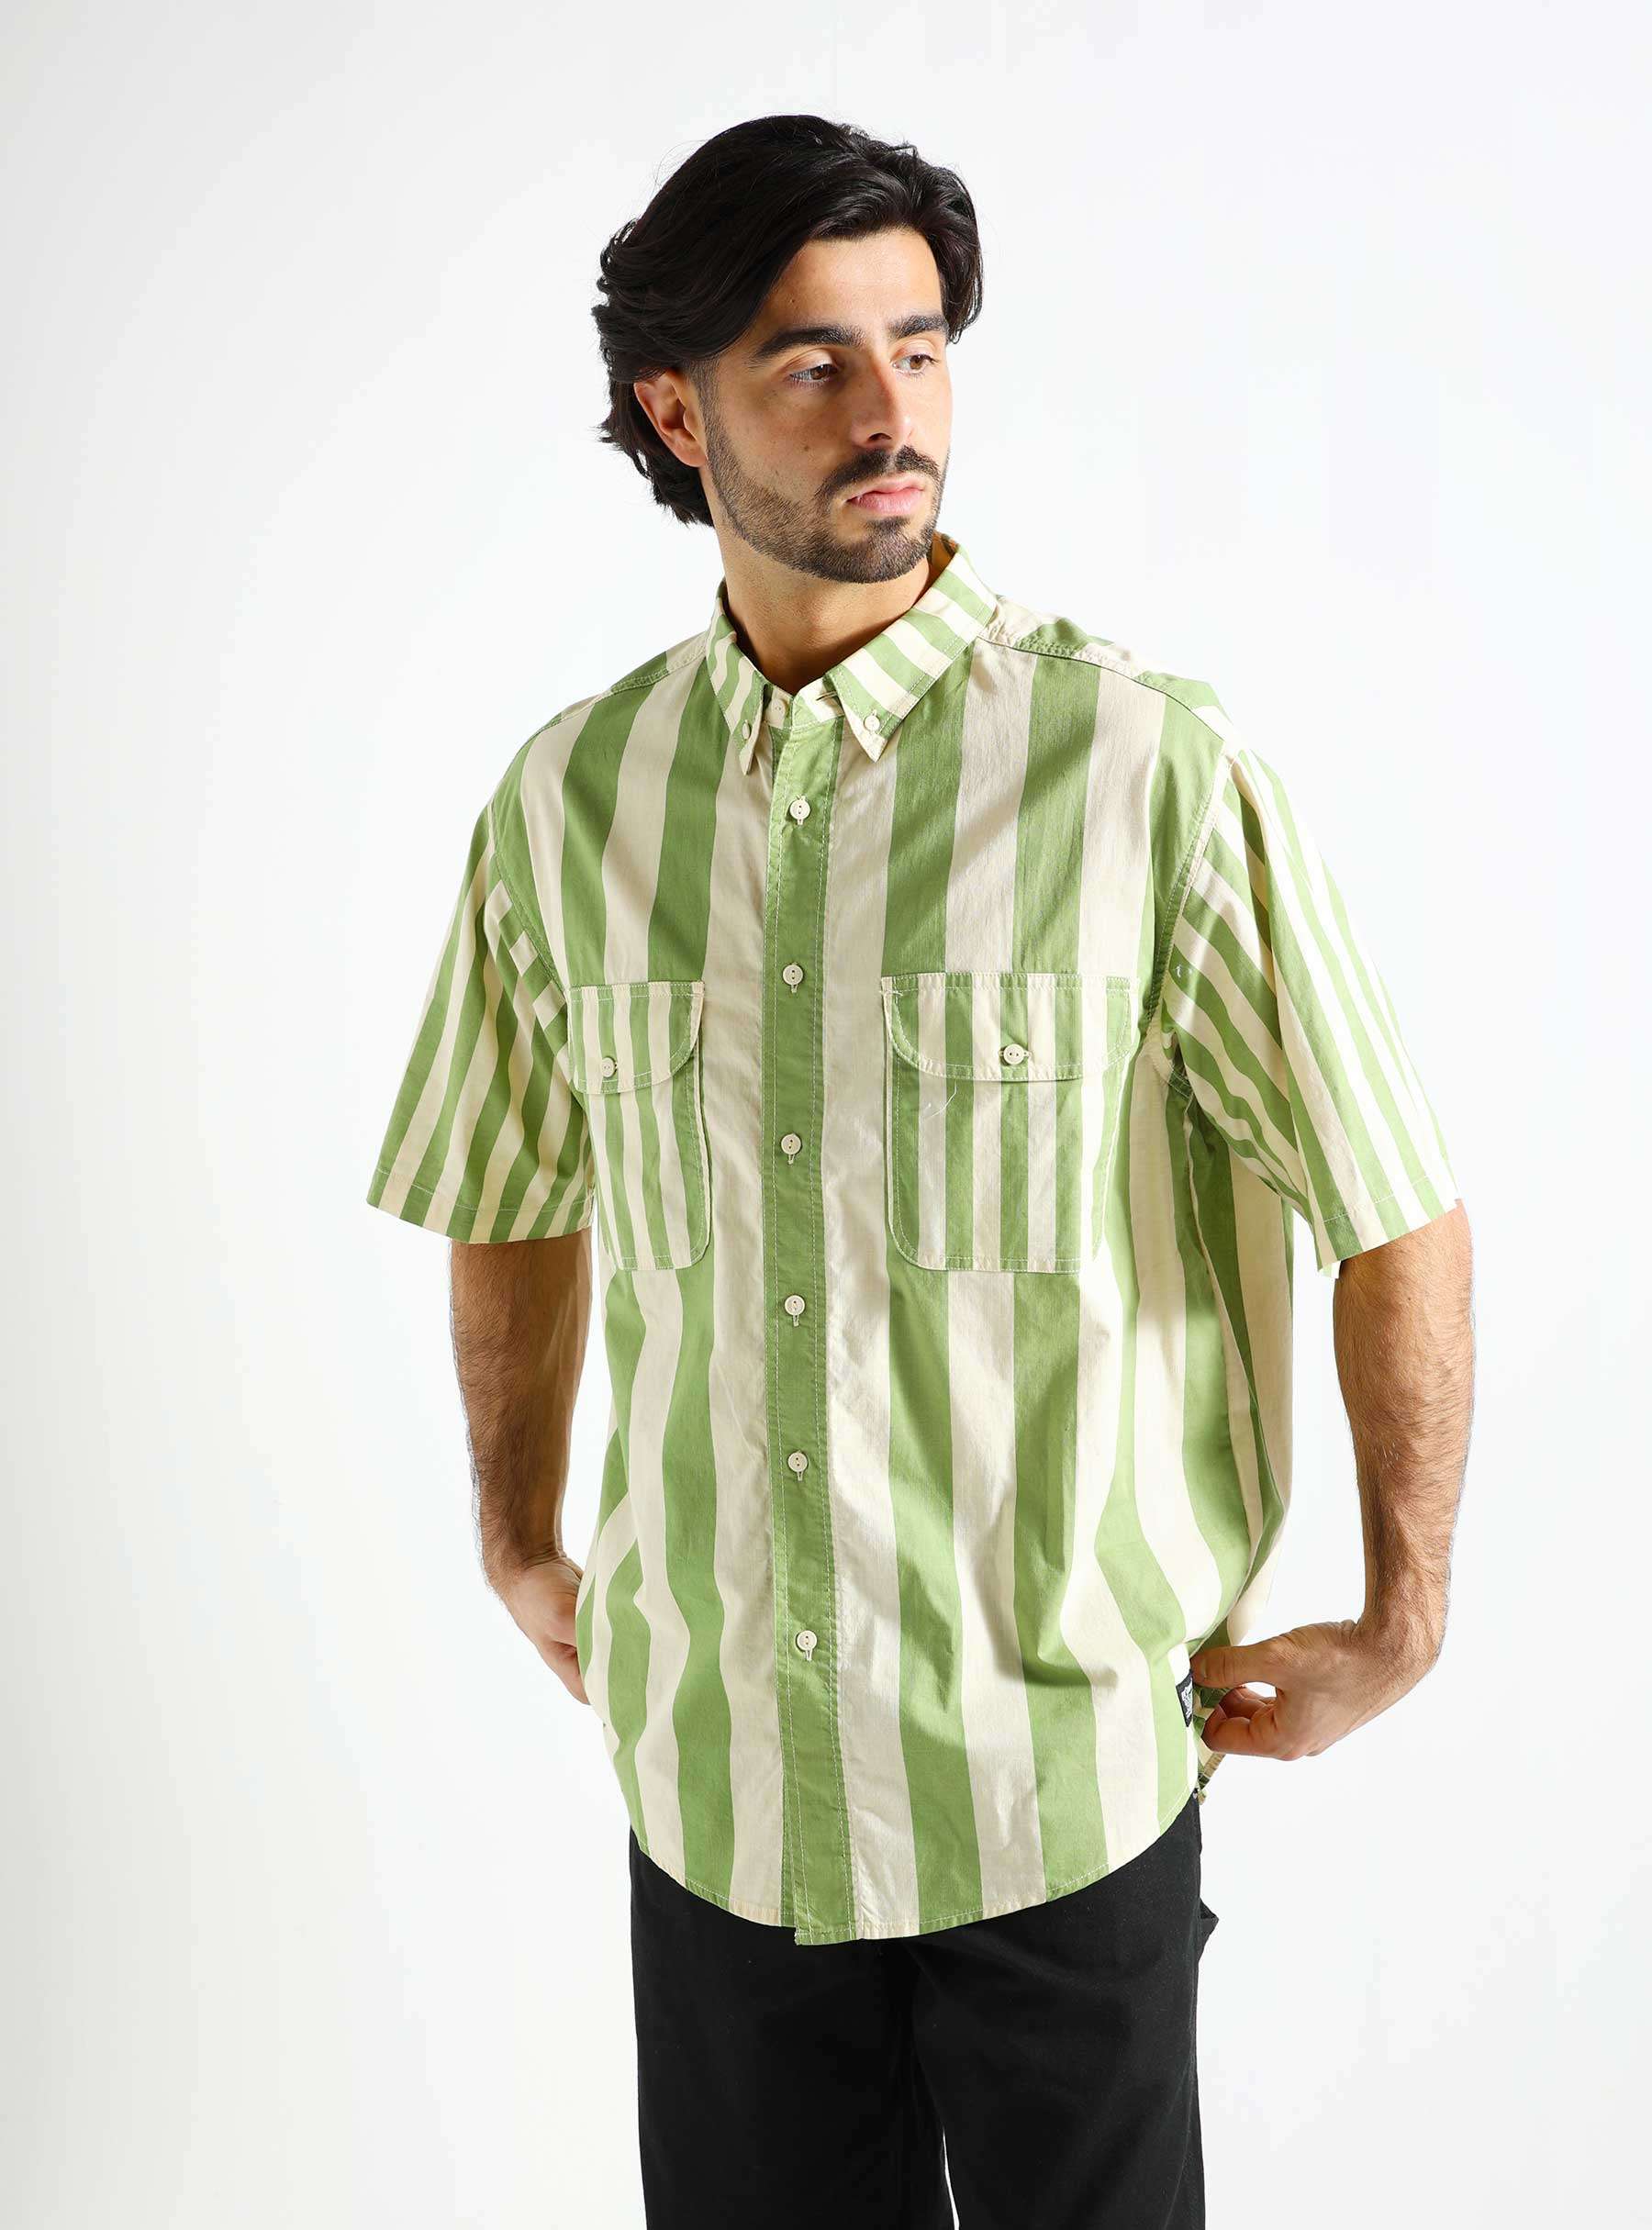 Skate Woven Mixed Up T-shirt Green White Stripes A4329-0002